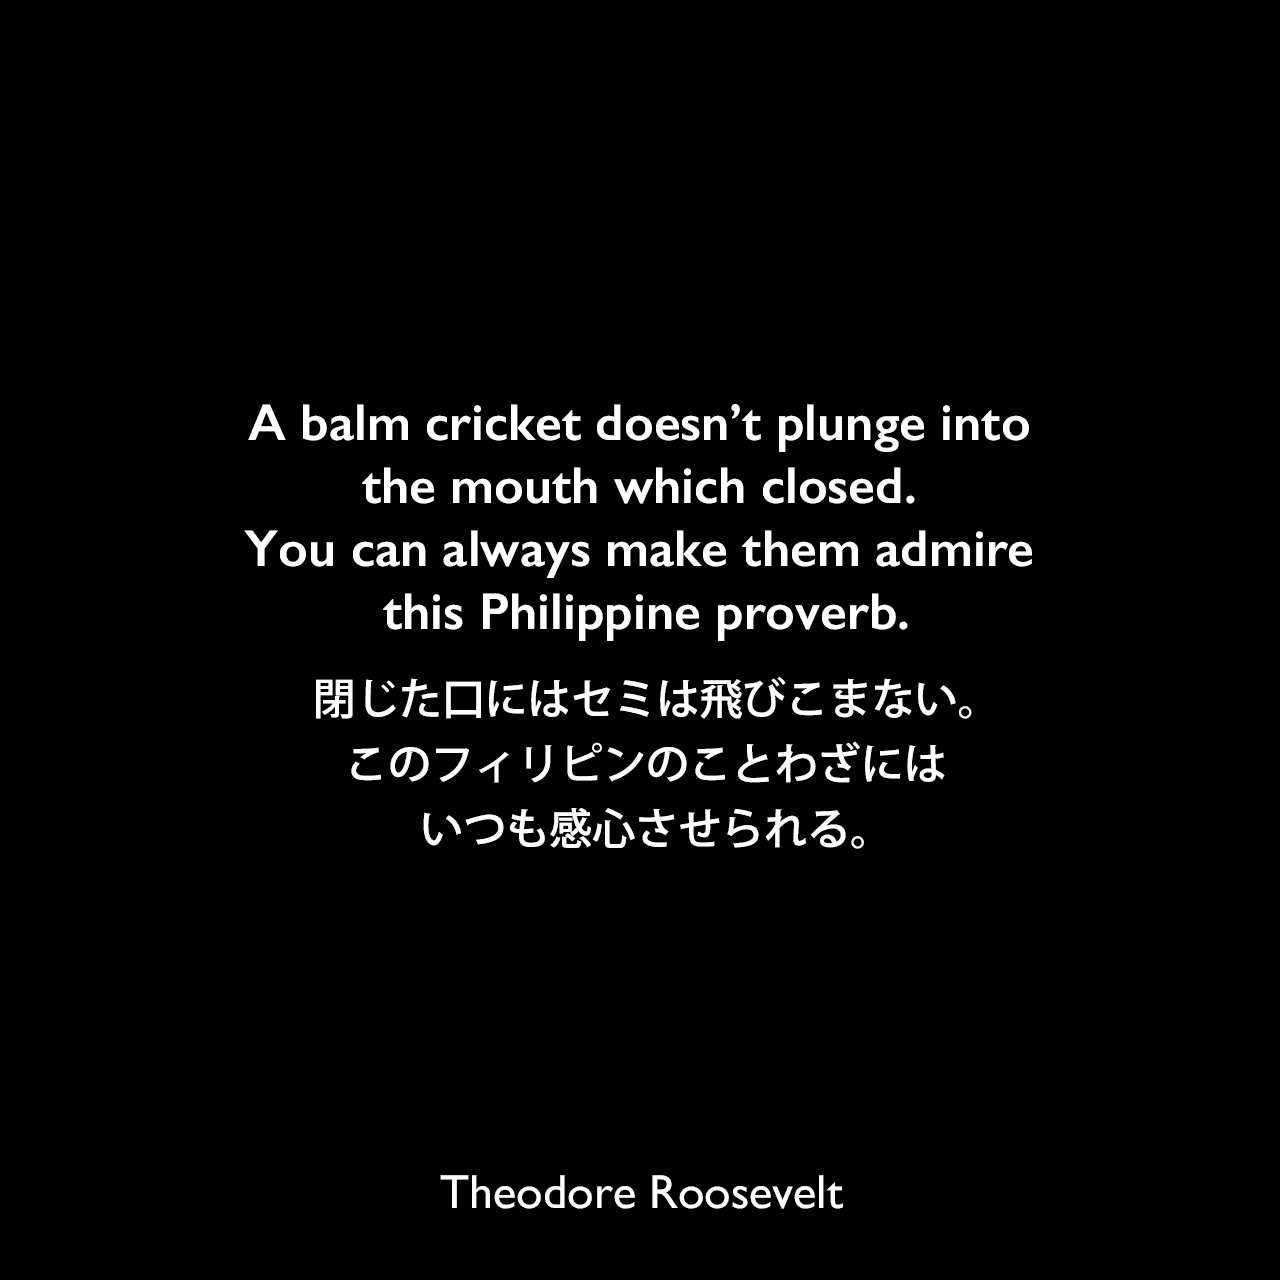 A balm cricket doesn’t plunge into the mouth which closed. You can always make them admire this Philippine proverb.閉じた口にはセミは飛びこまない。このフィリピンのことわざには、いつも感心させられる。Theodore Roosevelt